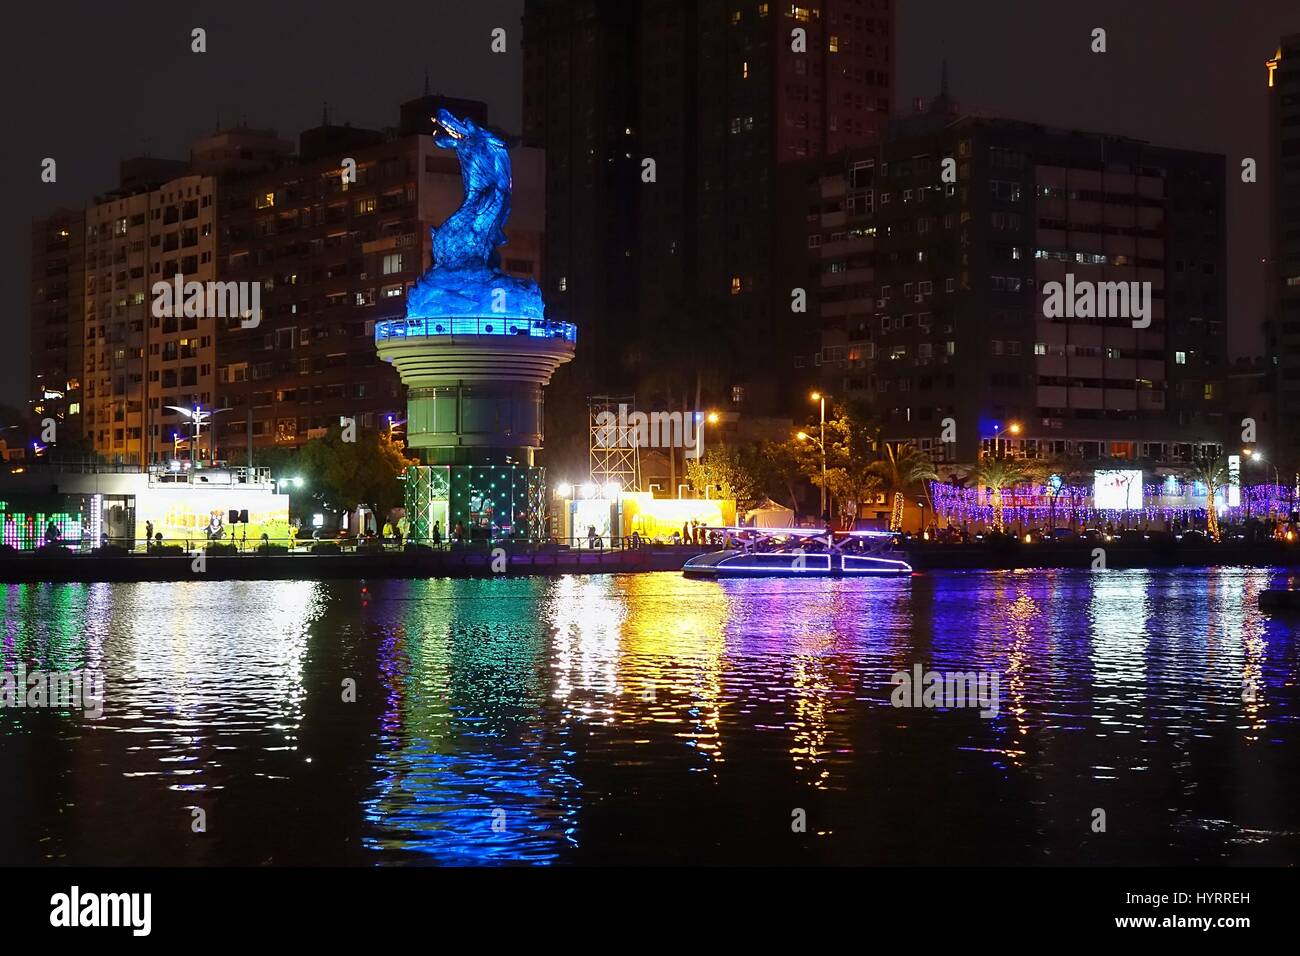 KAOHSIUNG, TAIWAN -- MARCH 6, 2015: To celebrate the Chinese year the banks of the Love River are illuminated  during the traditional Lantern Festival Stock Photo